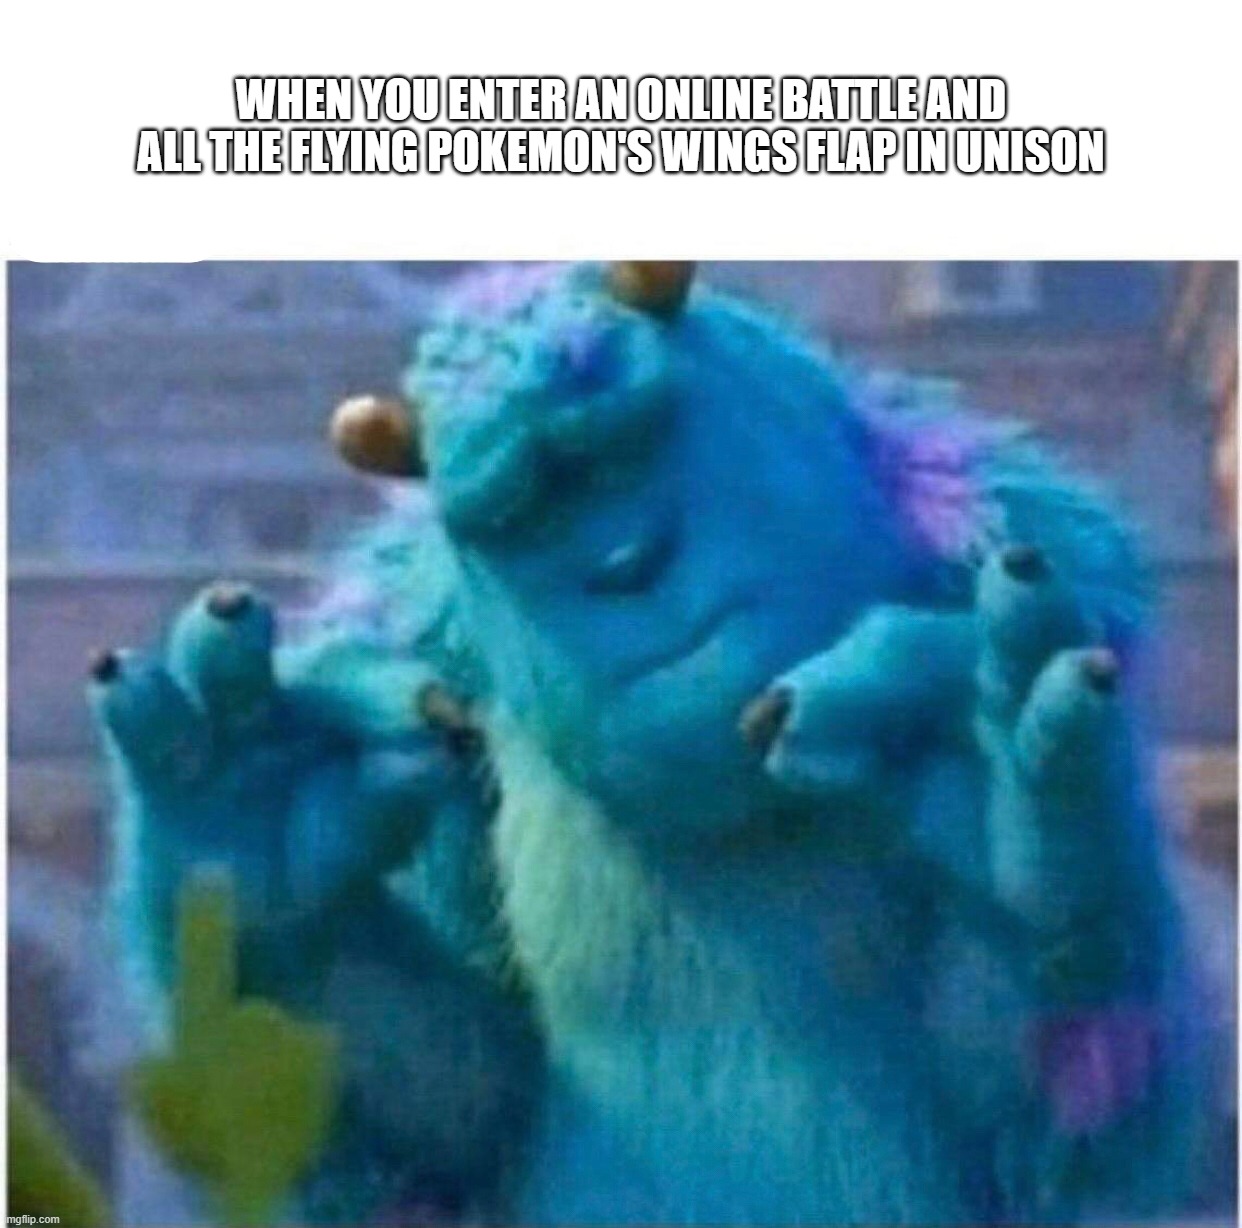 Pleased Sulley | WHEN YOU ENTER AN ONLINE BATTLE AND ALL THE FLYING POKEMON'S WINGS FLAP IN UNISON | image tagged in pleased sulley | made w/ Imgflip meme maker